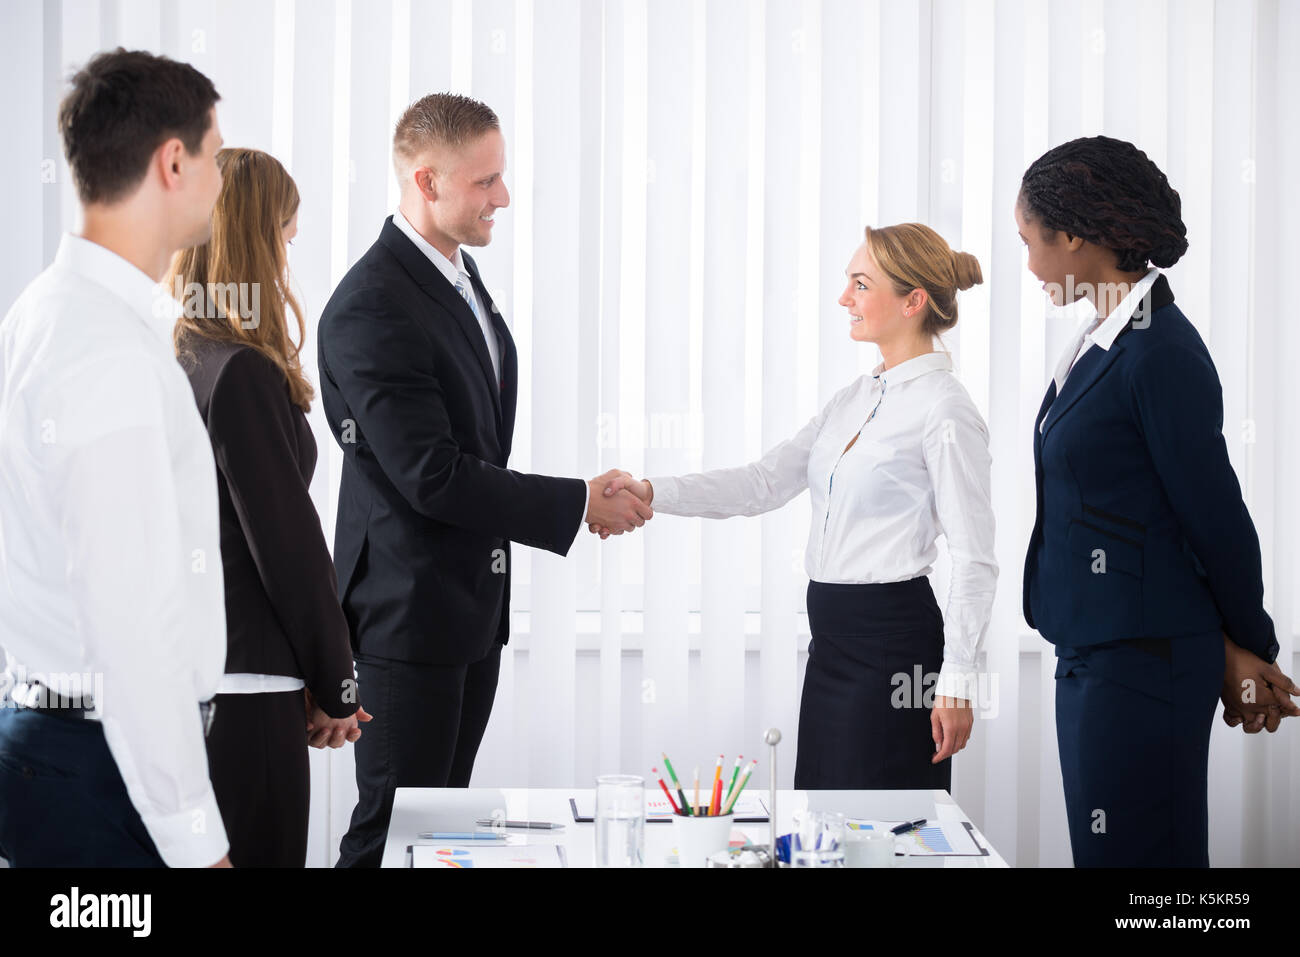 Businesspeople Looking At Two Young Business Partners Shaking Hands In Office Stock Photo